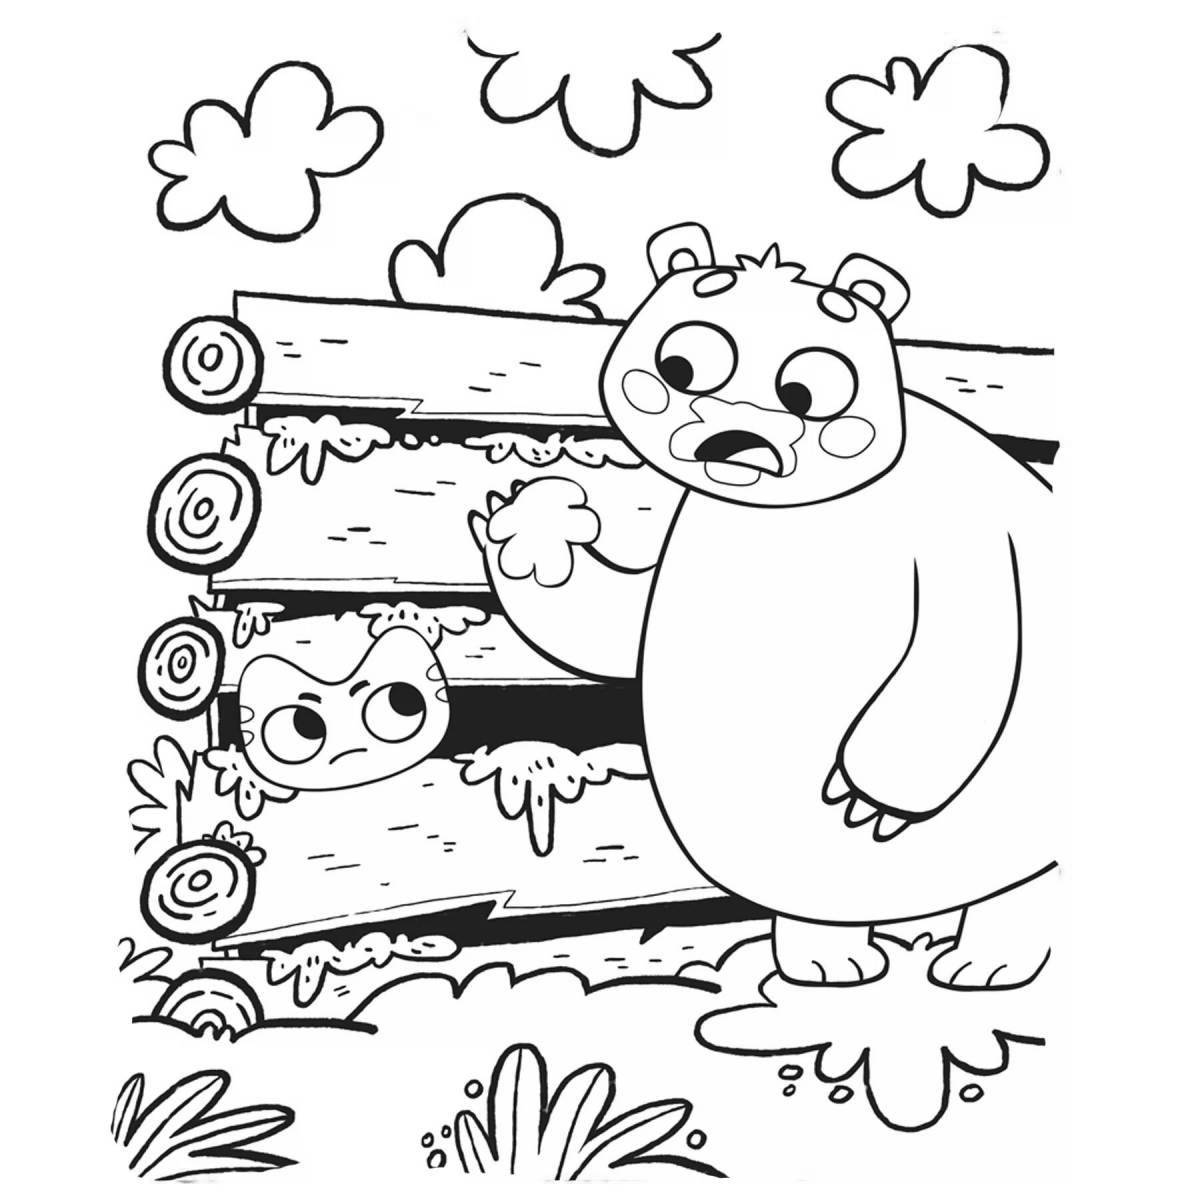 Super meow awesome coloring book for kids